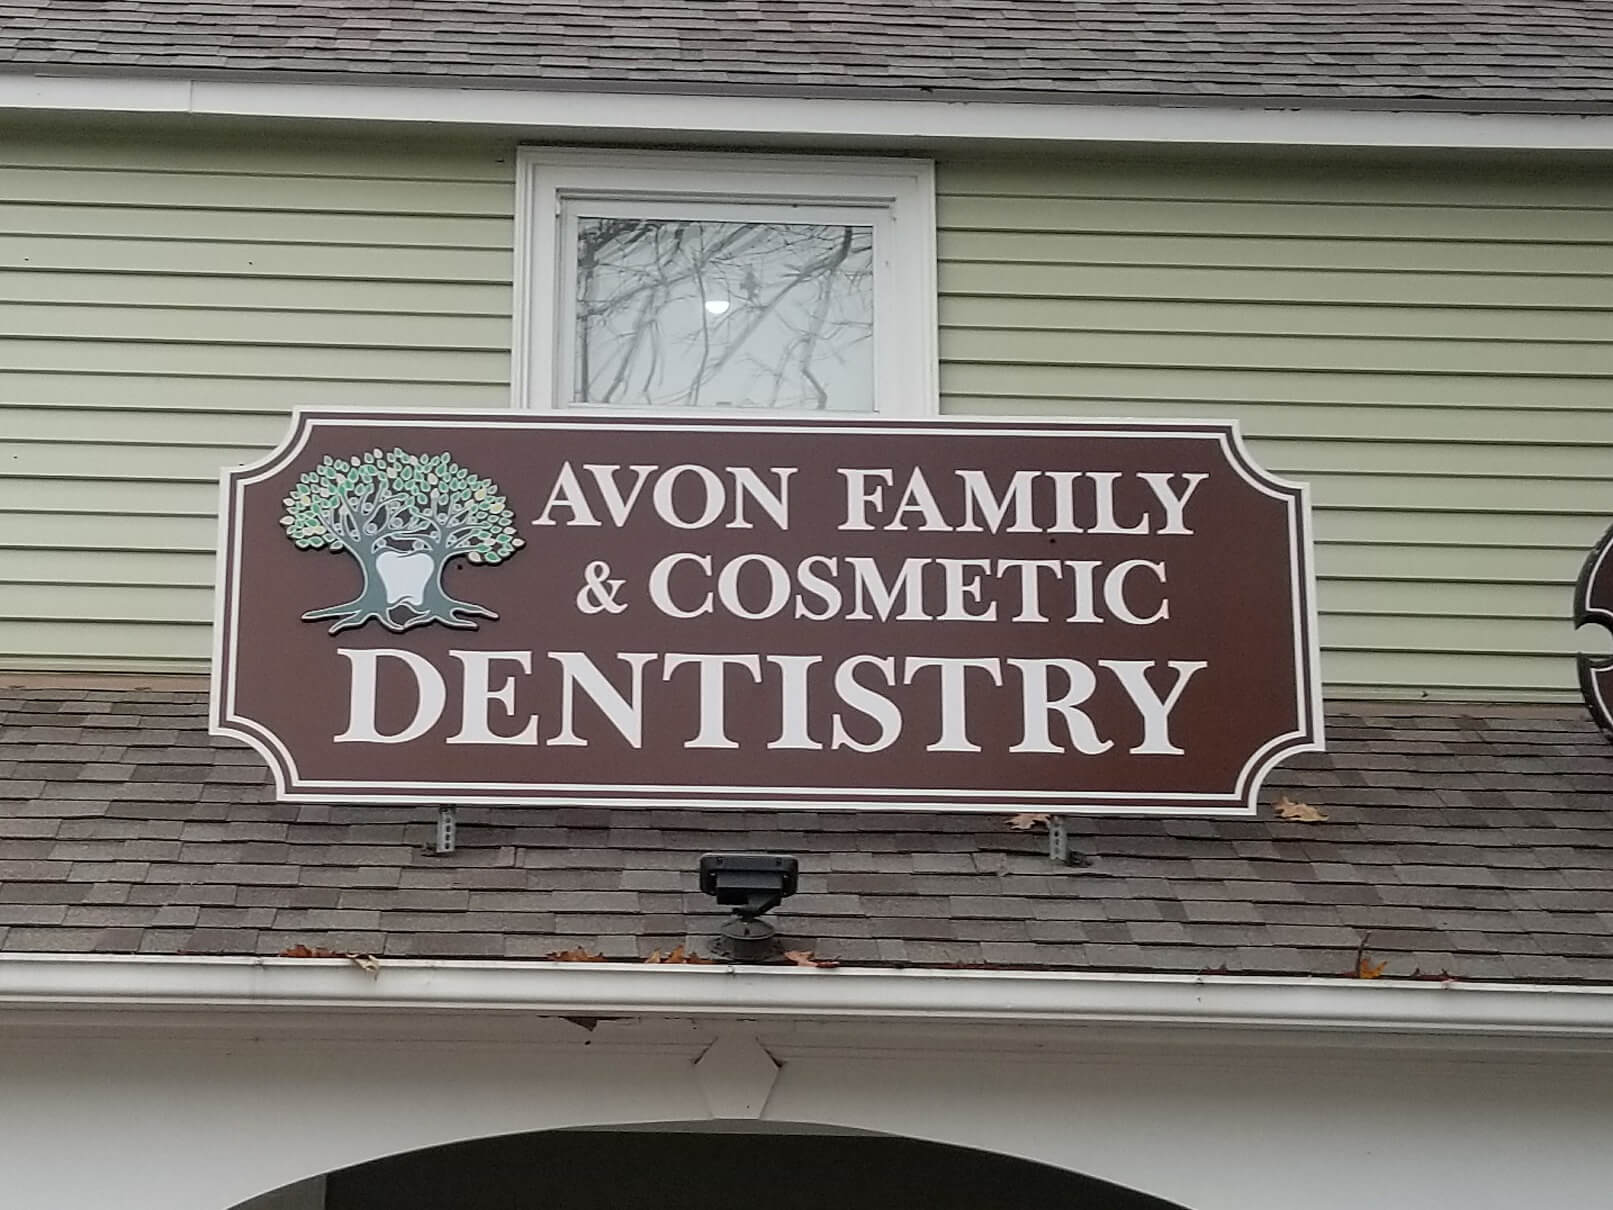 Avon Family and Cosmetic Dentistry